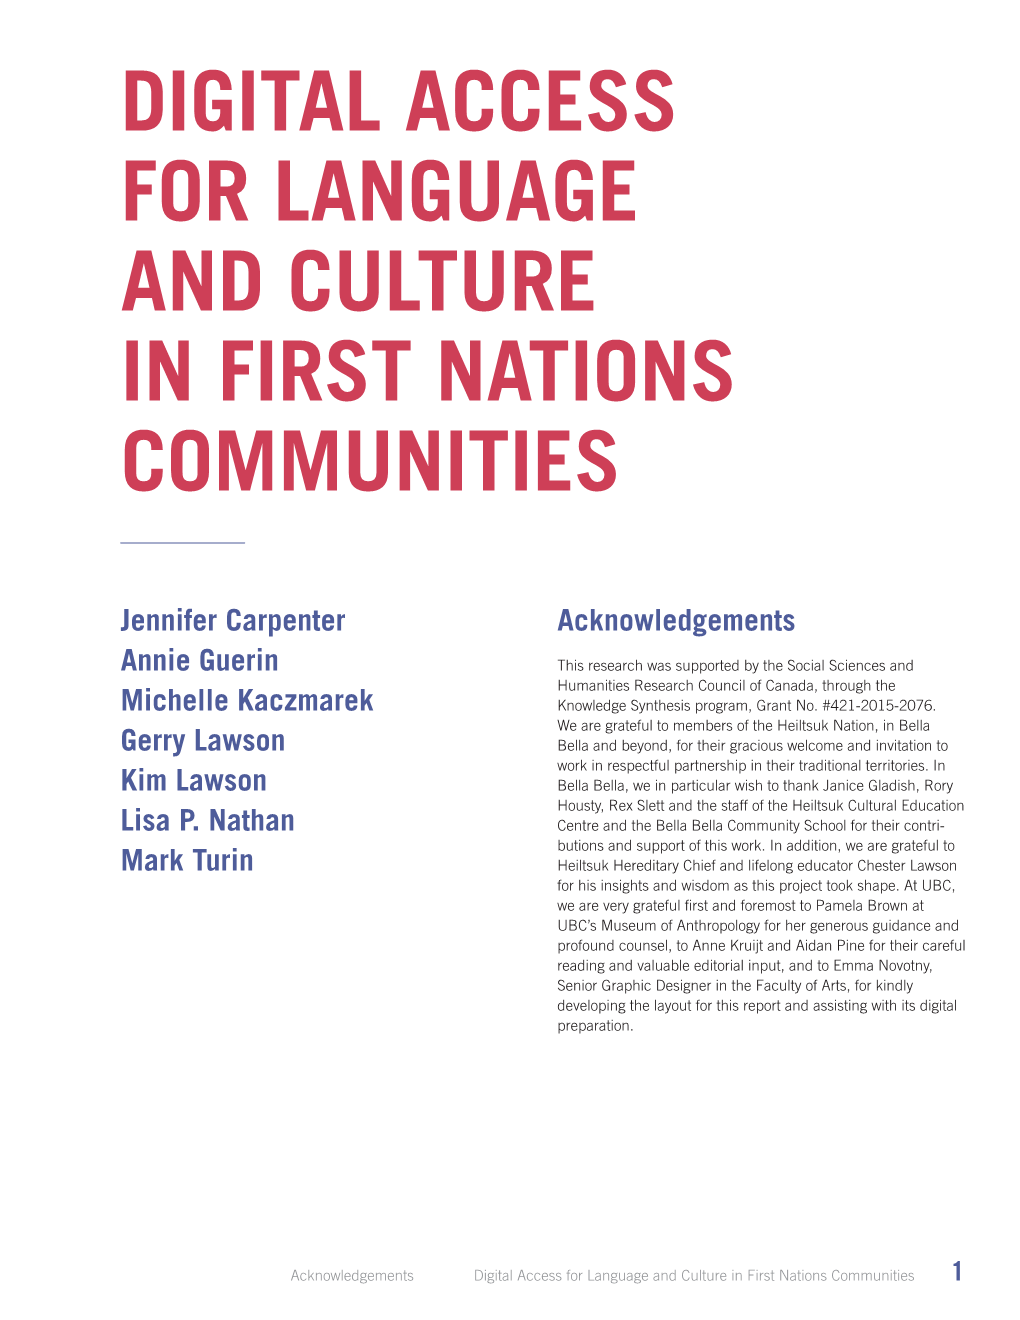 Digital Access for Language and Culture in First Nations Communities